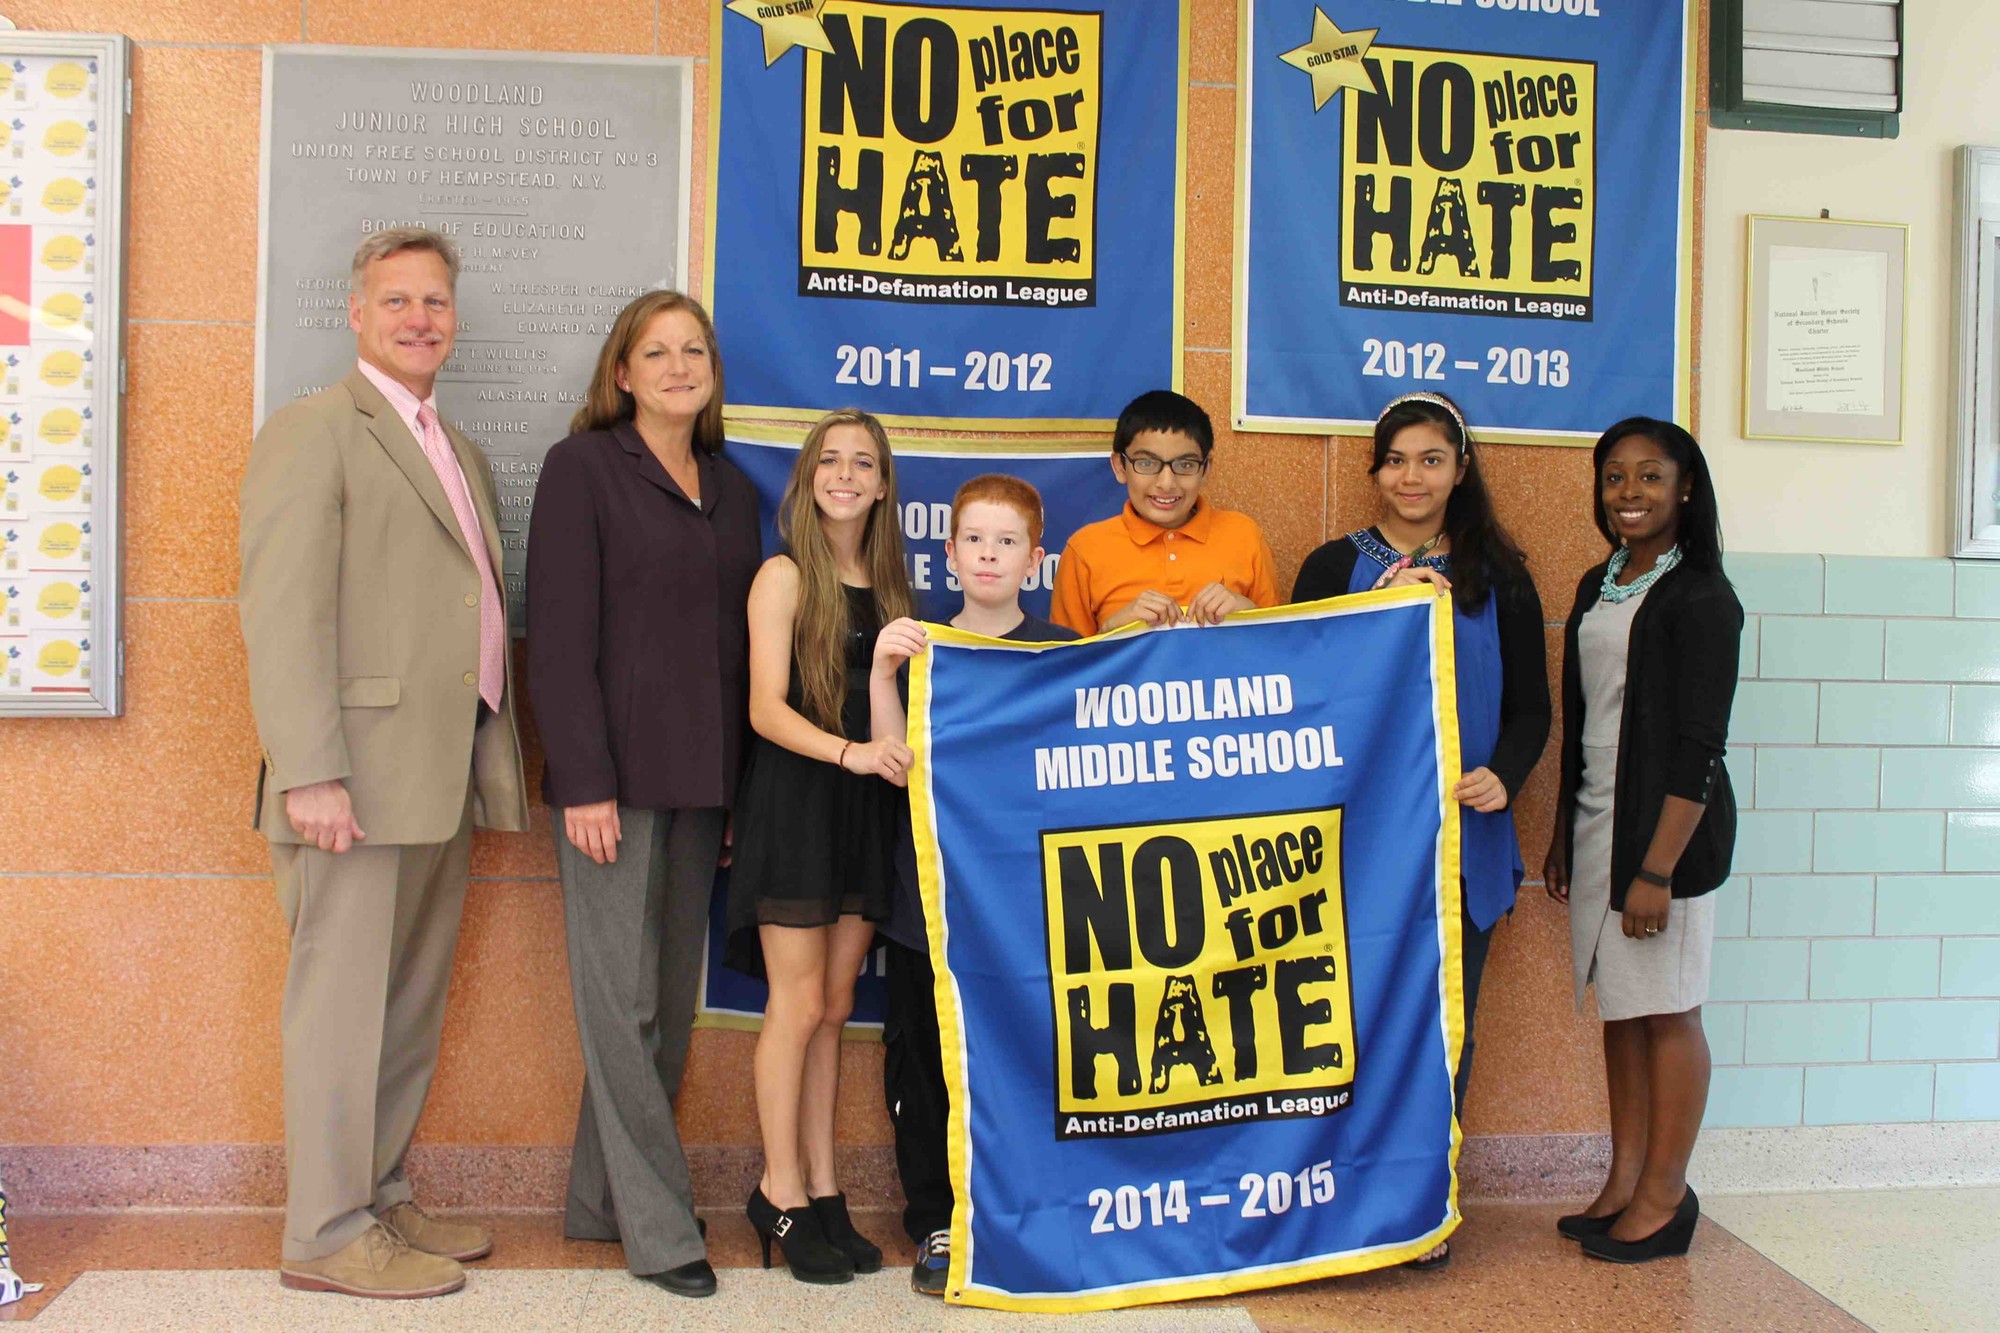 Woodland Middle School Principal James Lethbridge and Assistant Principal Patricia Graham, far left, and Anti-Defamation League representative Amanda Holder, far right, joined Woodland students to display their recently earned “No Place for Hate” banner.